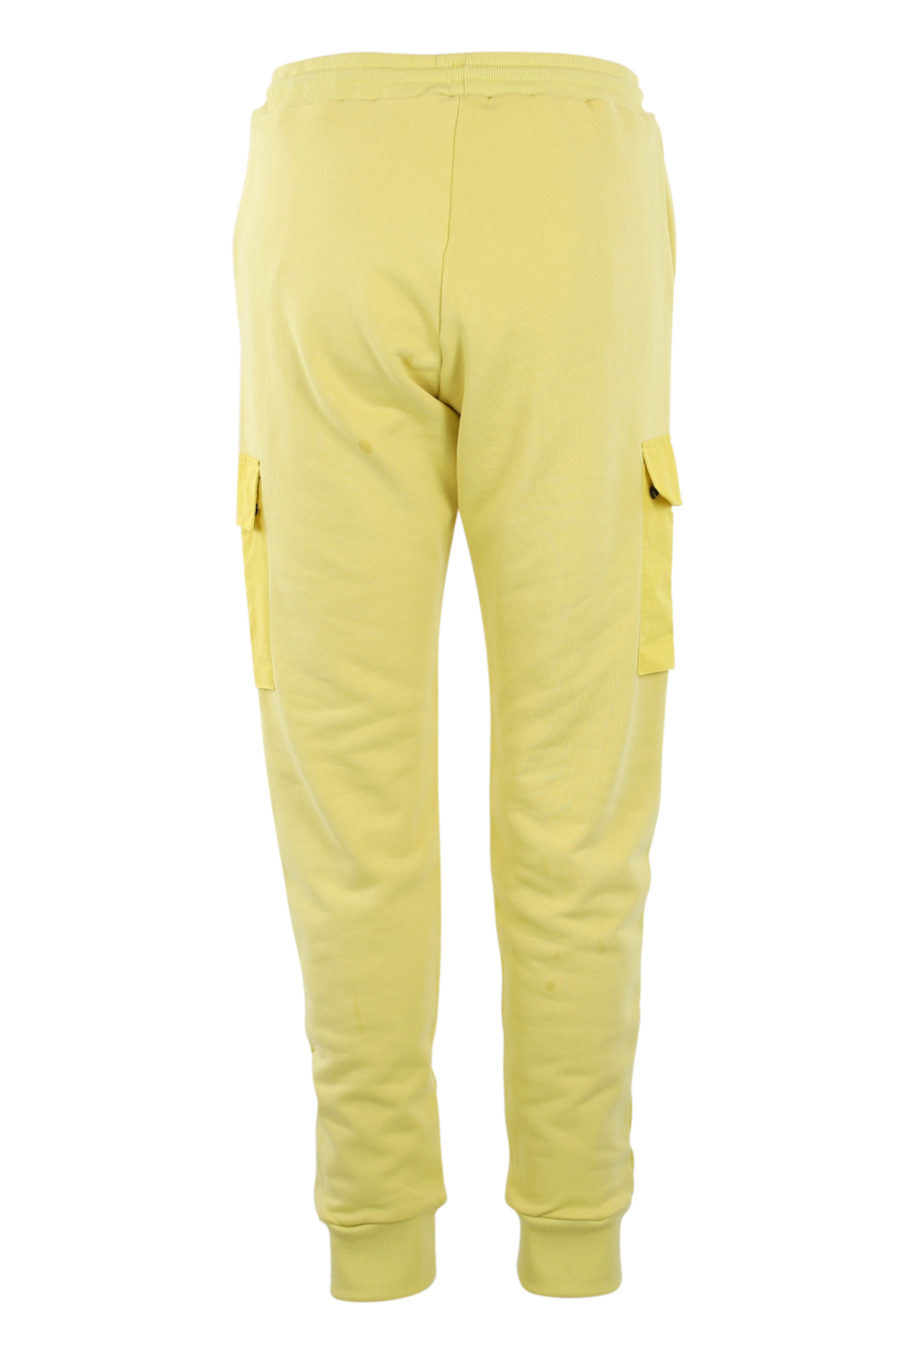 Yellow tracksuit bottoms with pockets - IMG 0907